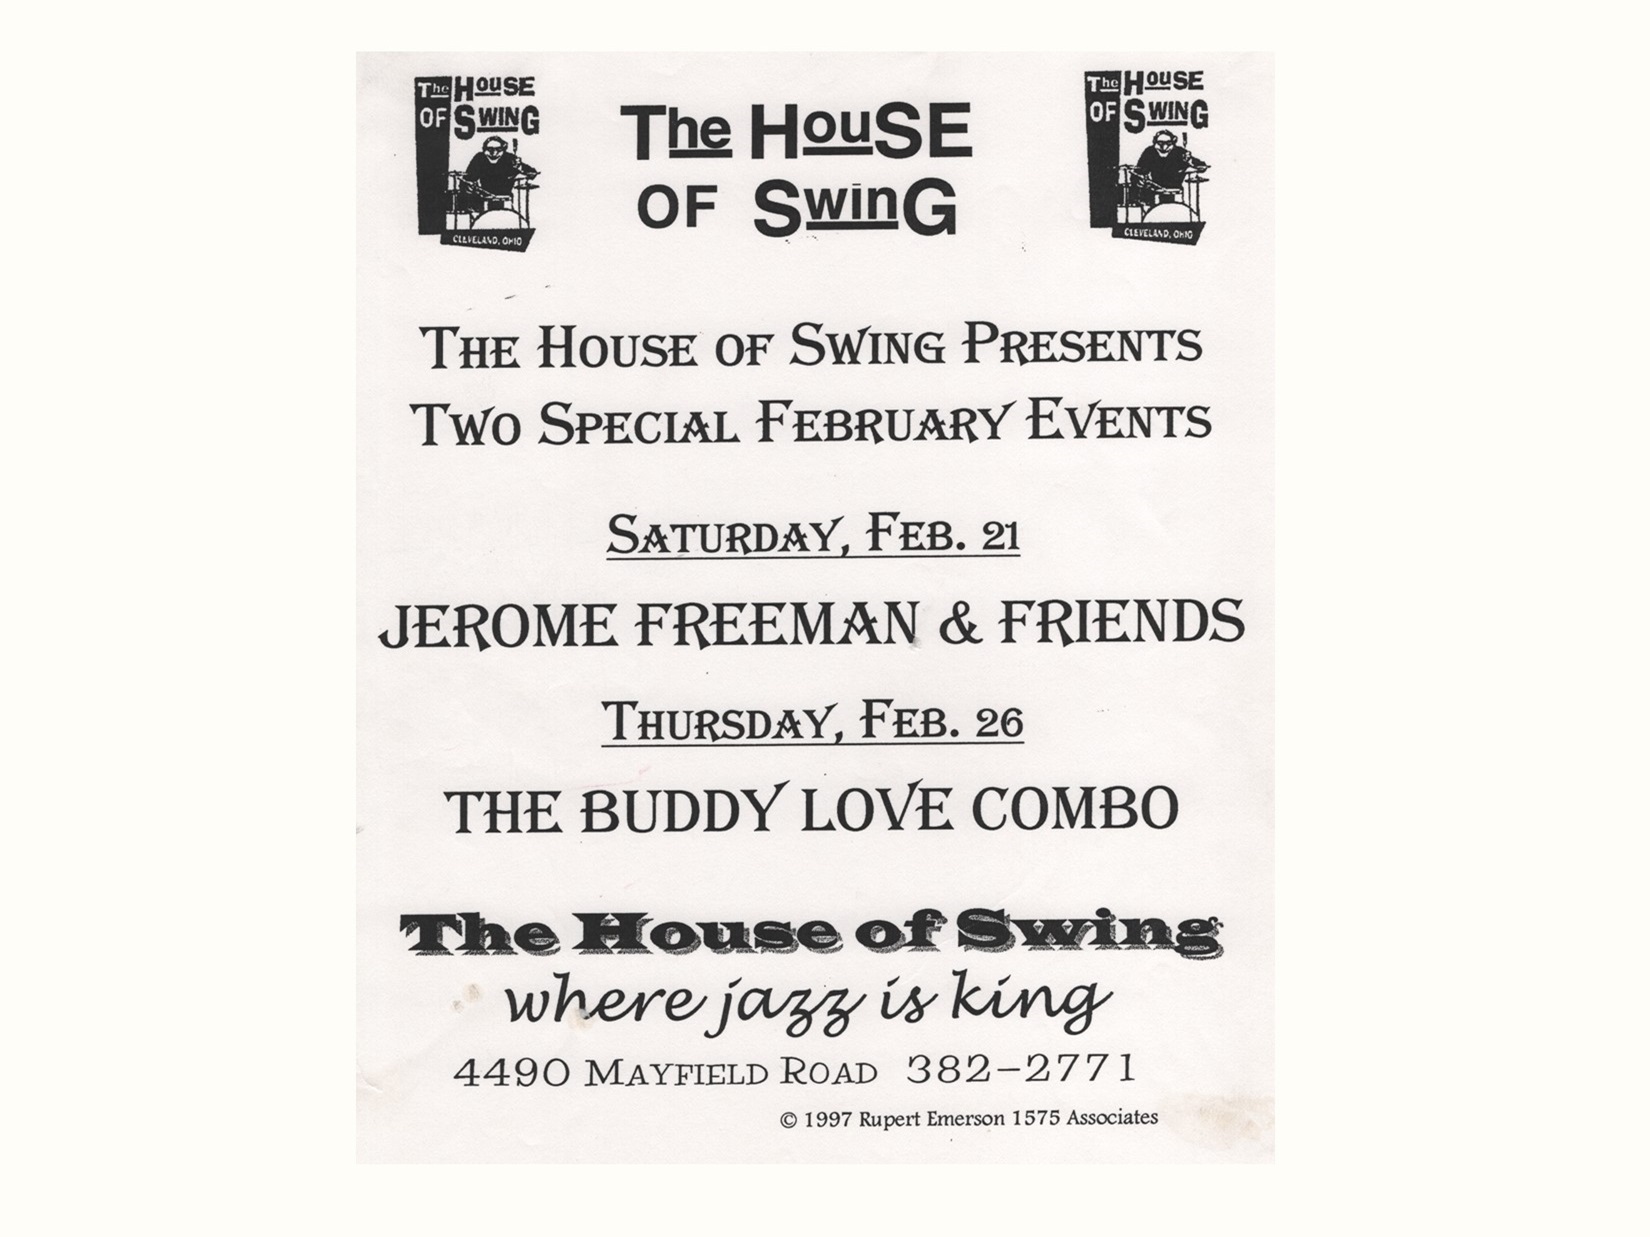 Buddy Love Combo at The House of Swing in 2000